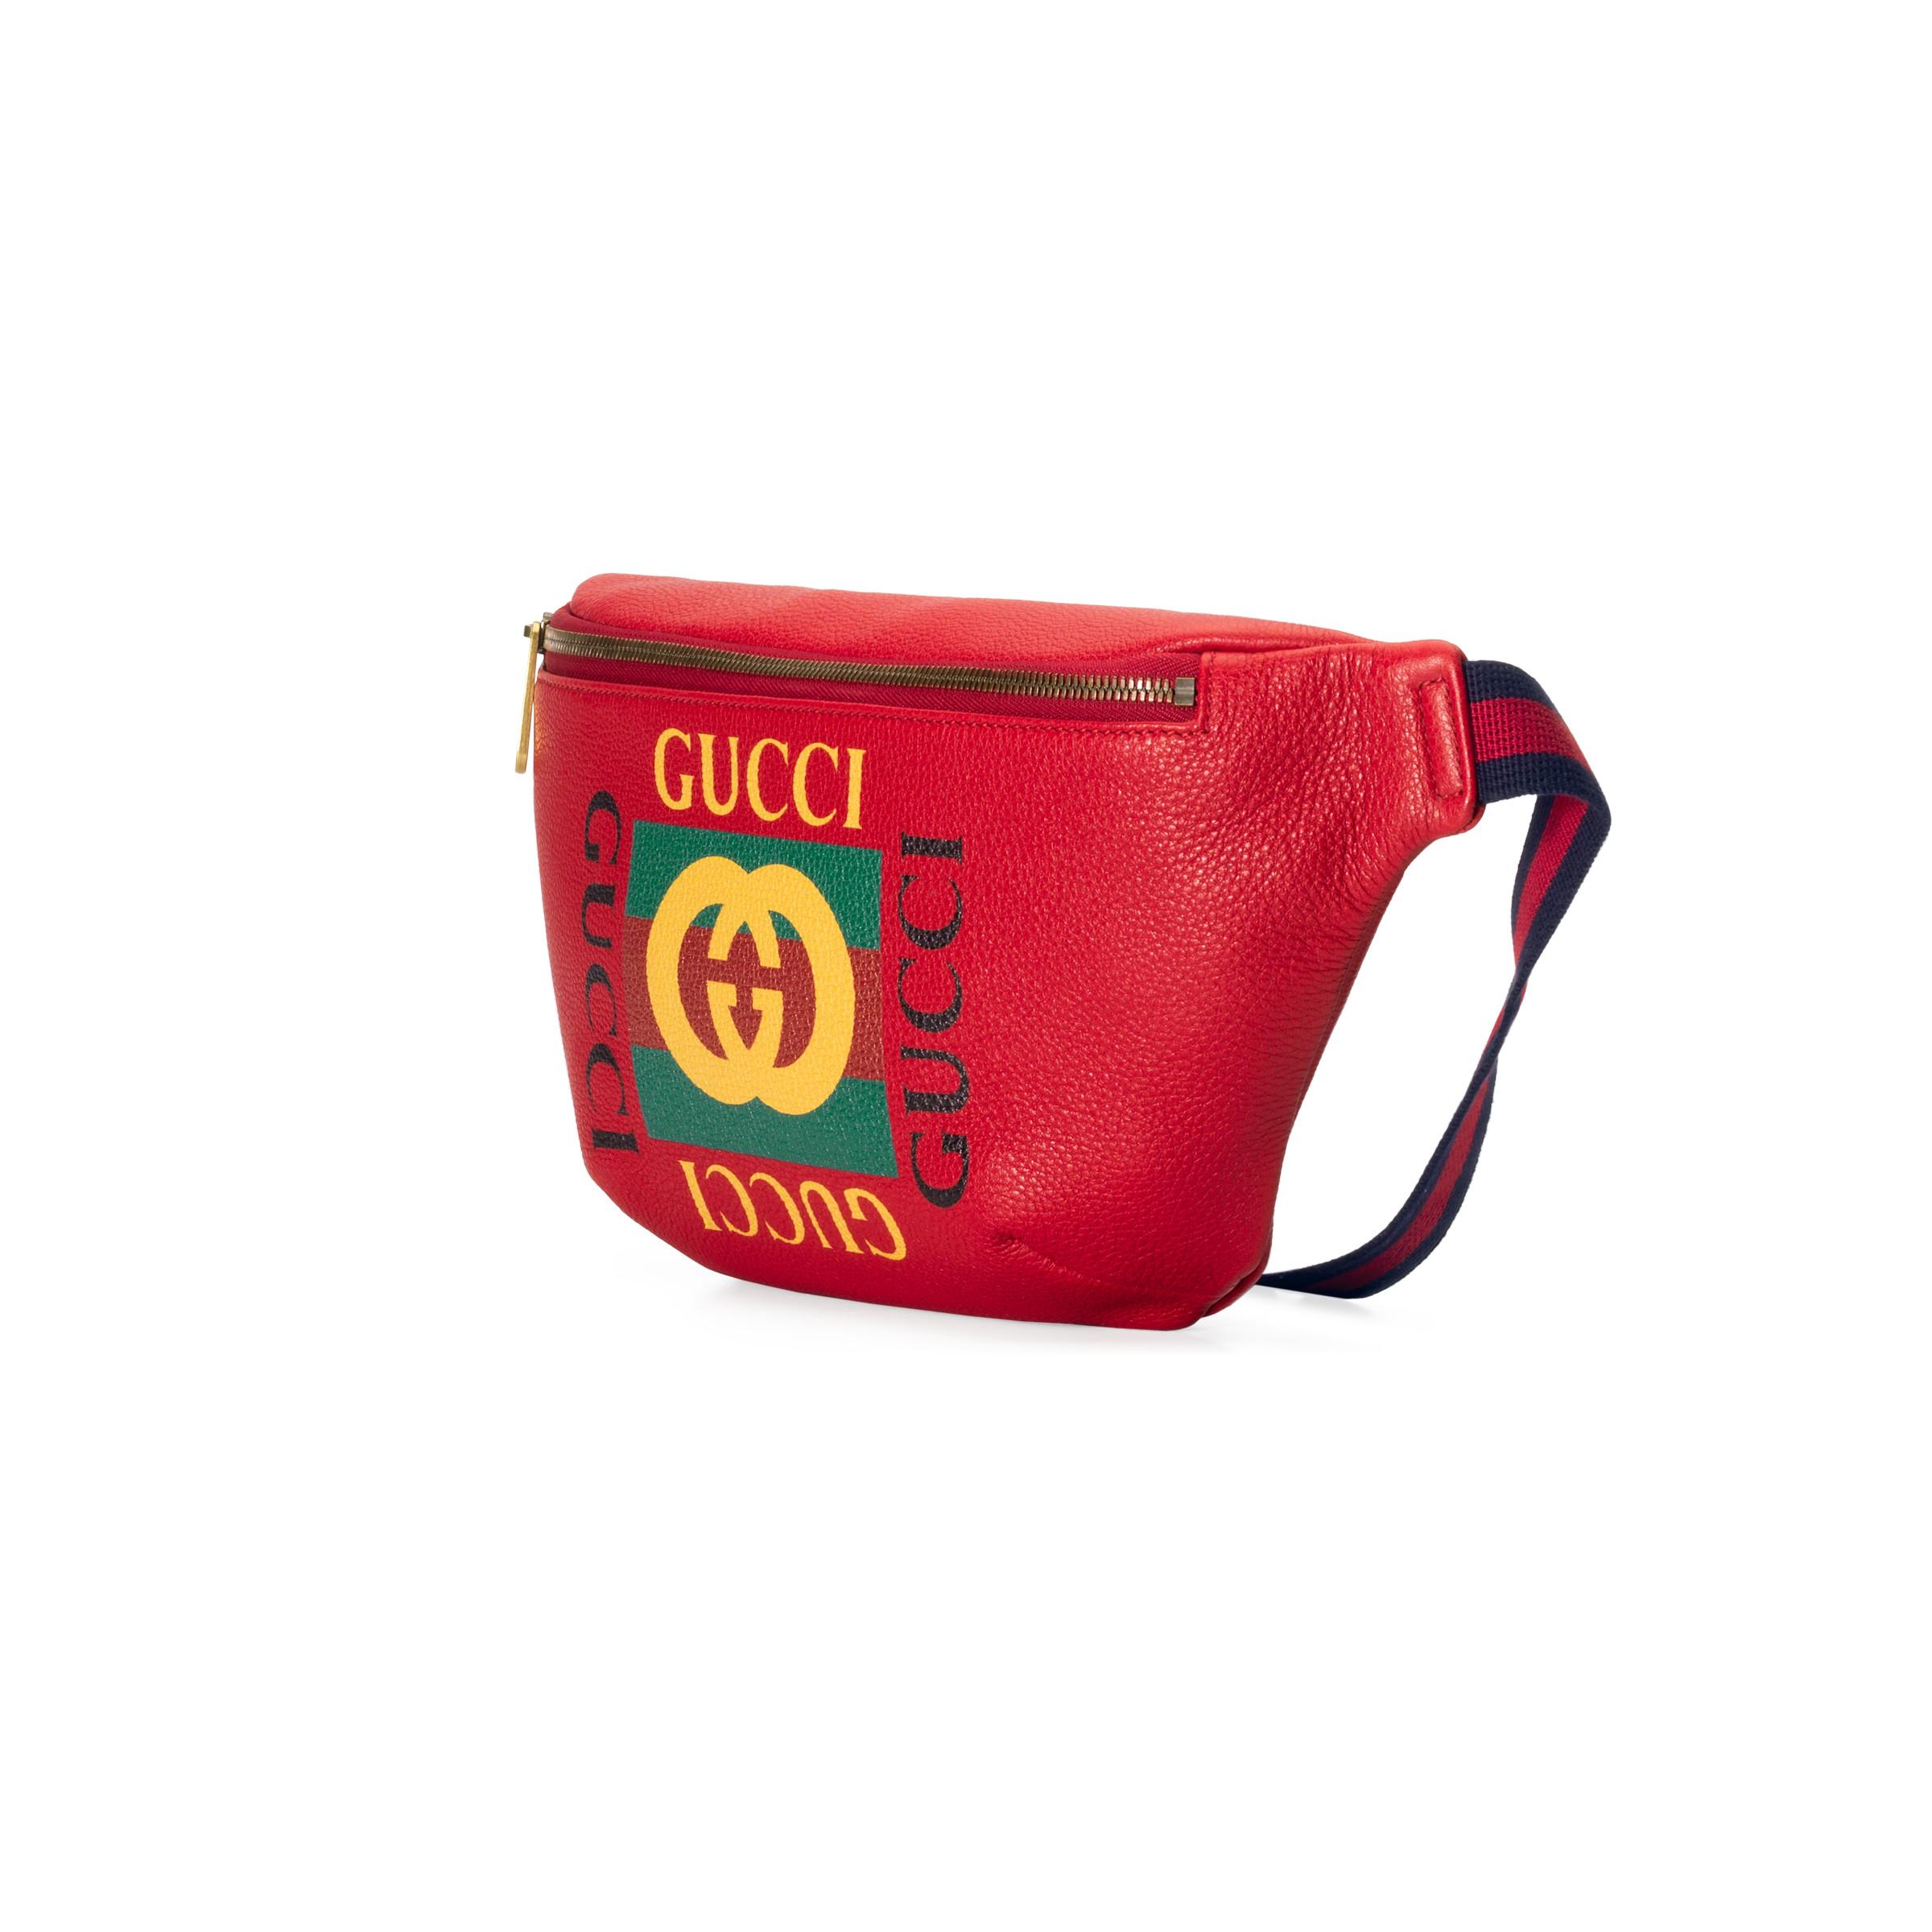 Gucci Print Leather Belt Bag in Red | Lyst